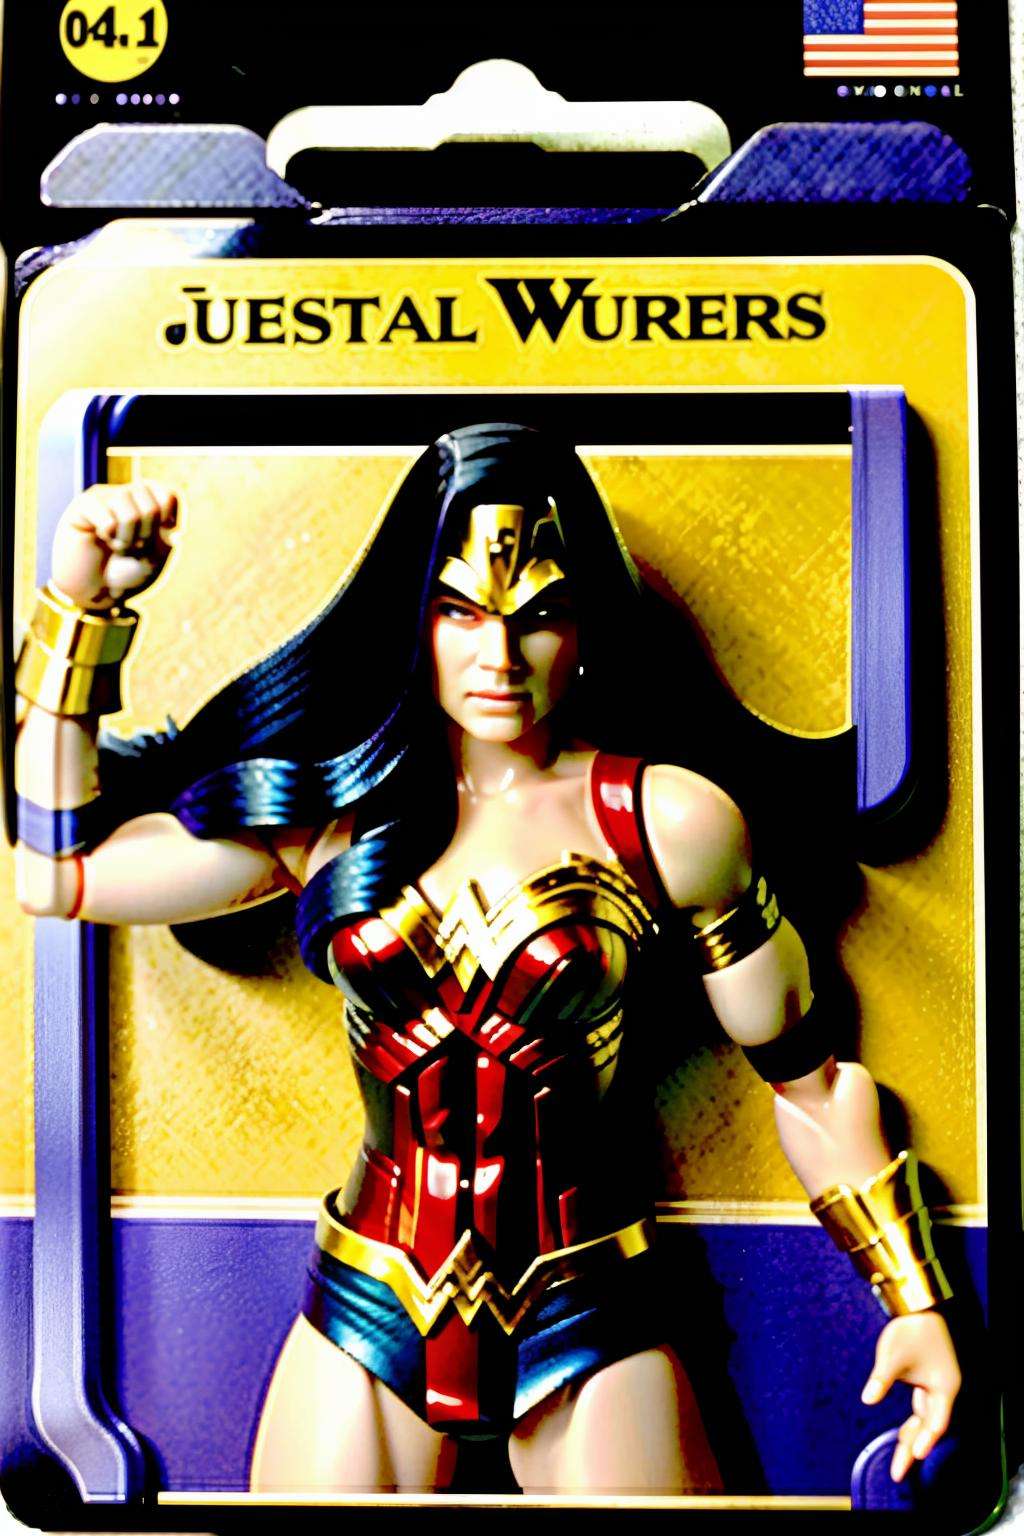 Dare-Wonder: A hybrid of Daredevil and Wonder Woman, this action figure embodies blind justice:0.6 and Amazonian warrior prowess:0.4. , awe_toys